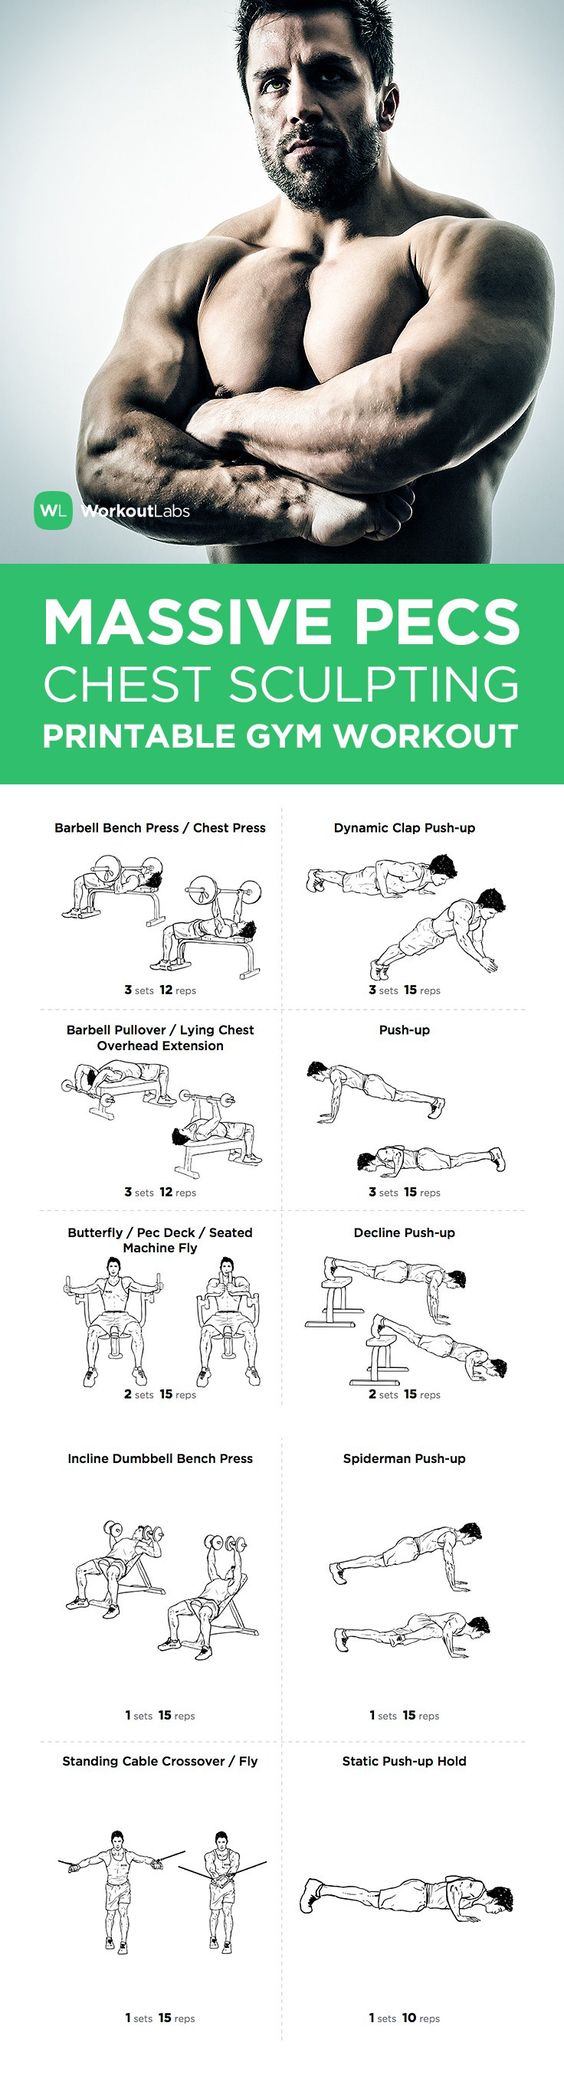 10 workouts for men - Chest Workouts